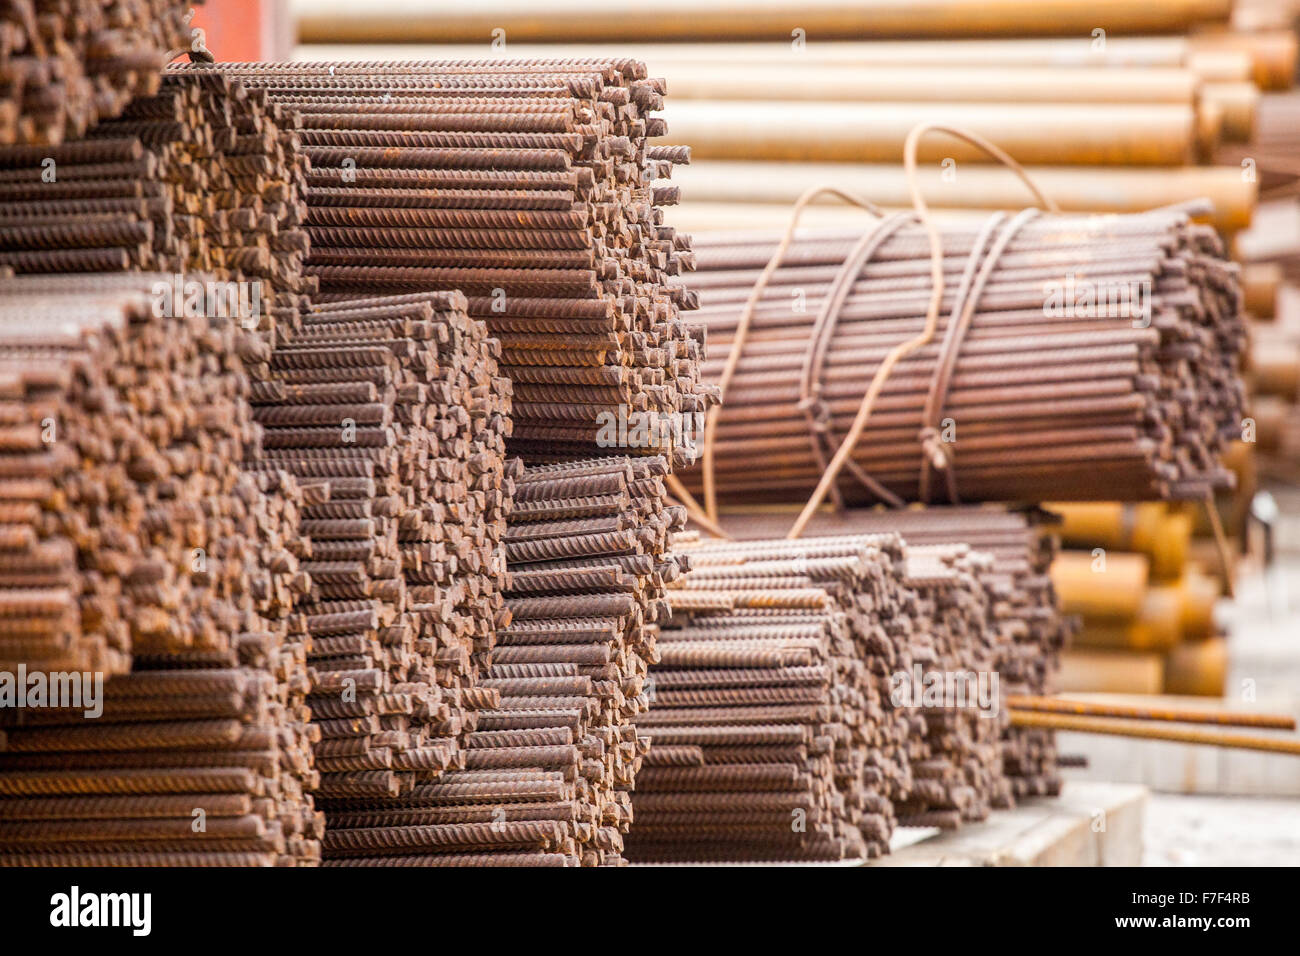 Stack of rods or bars Stock Photo